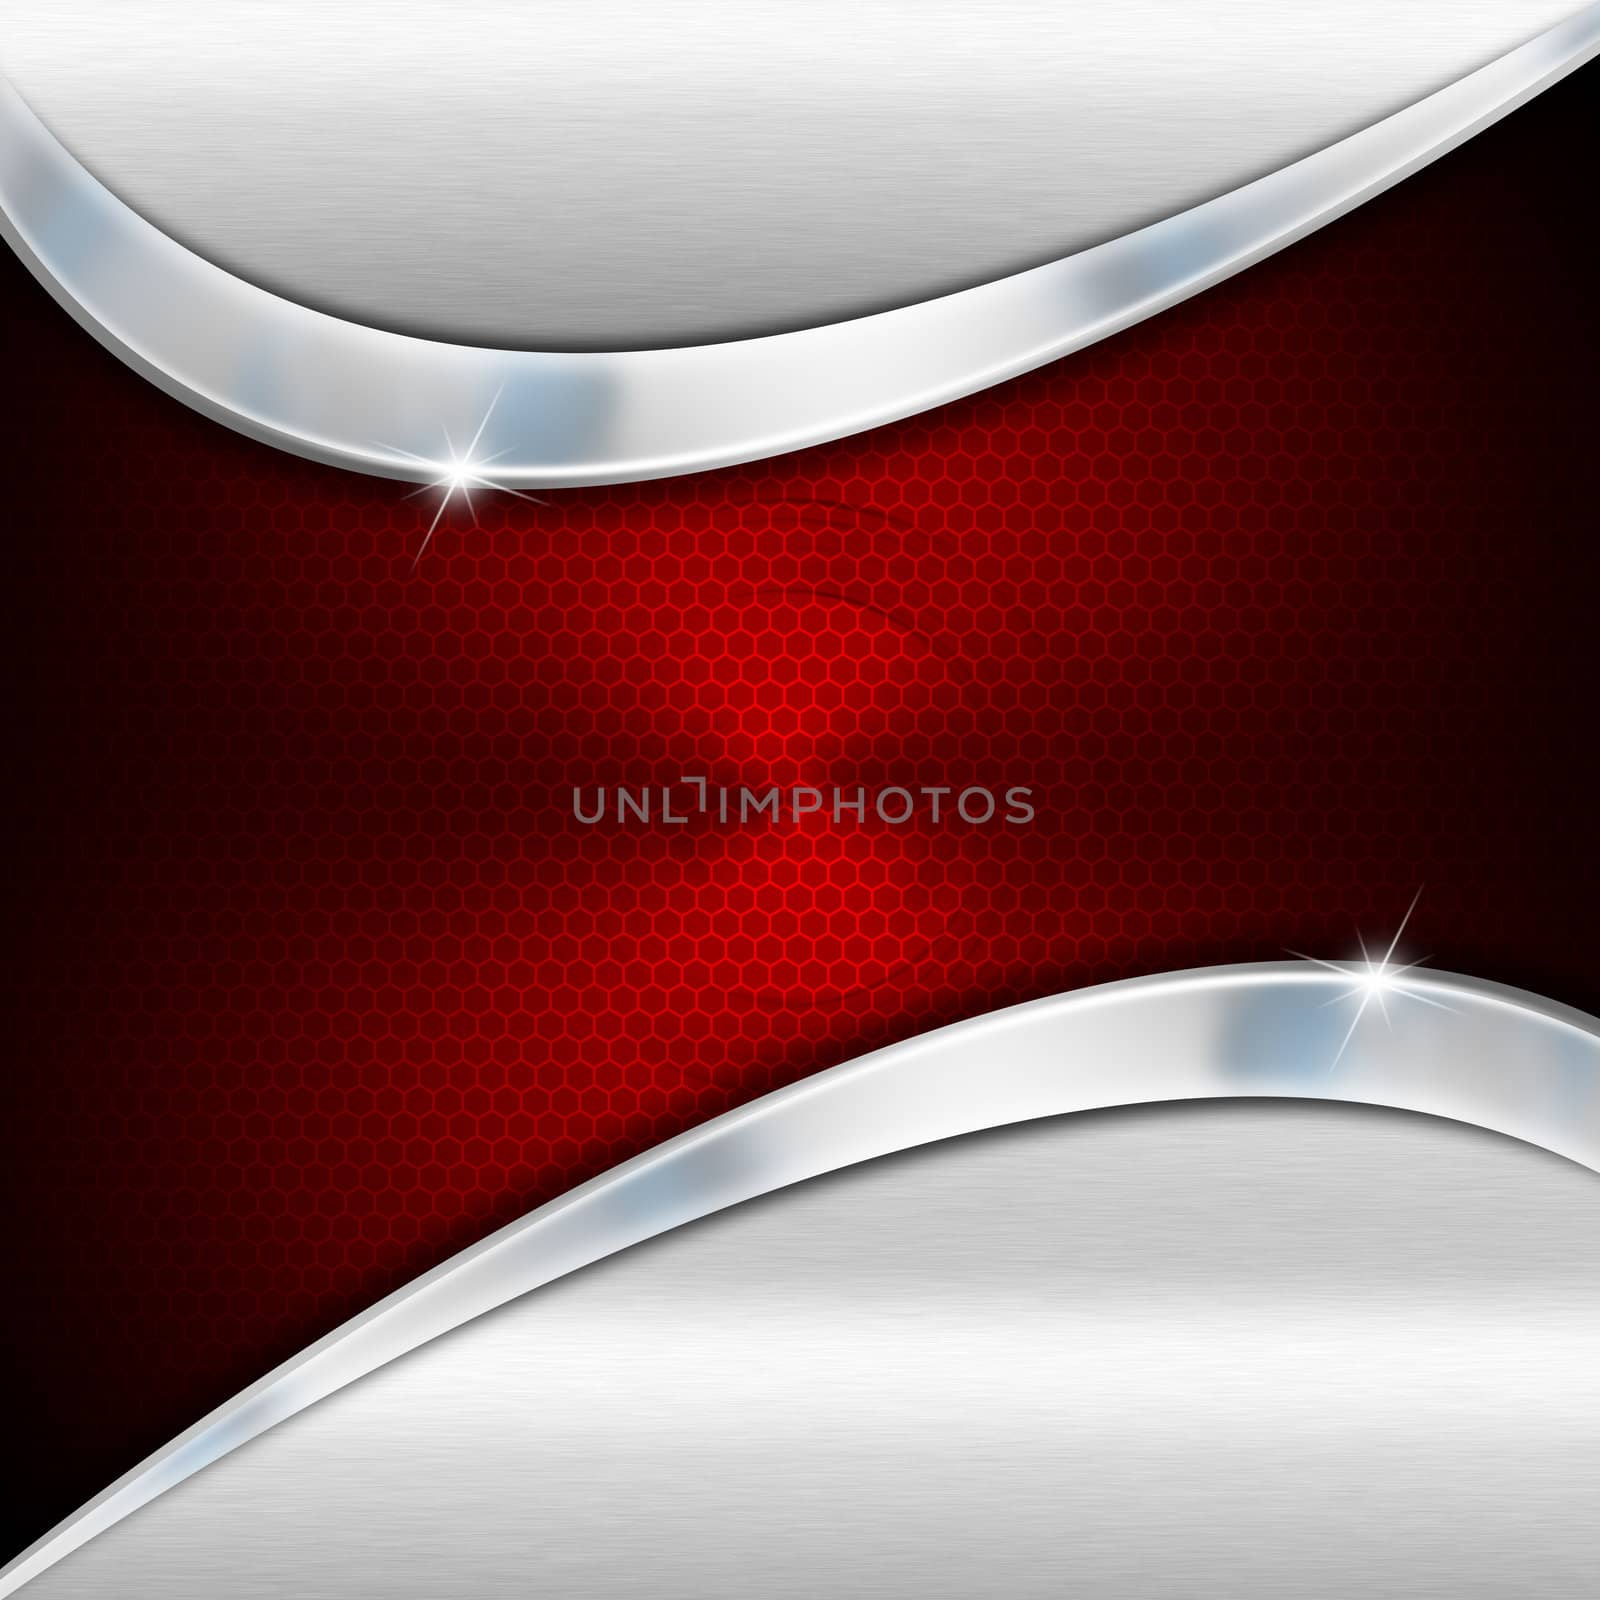 Red and metal business background with waves, grid and reflections
